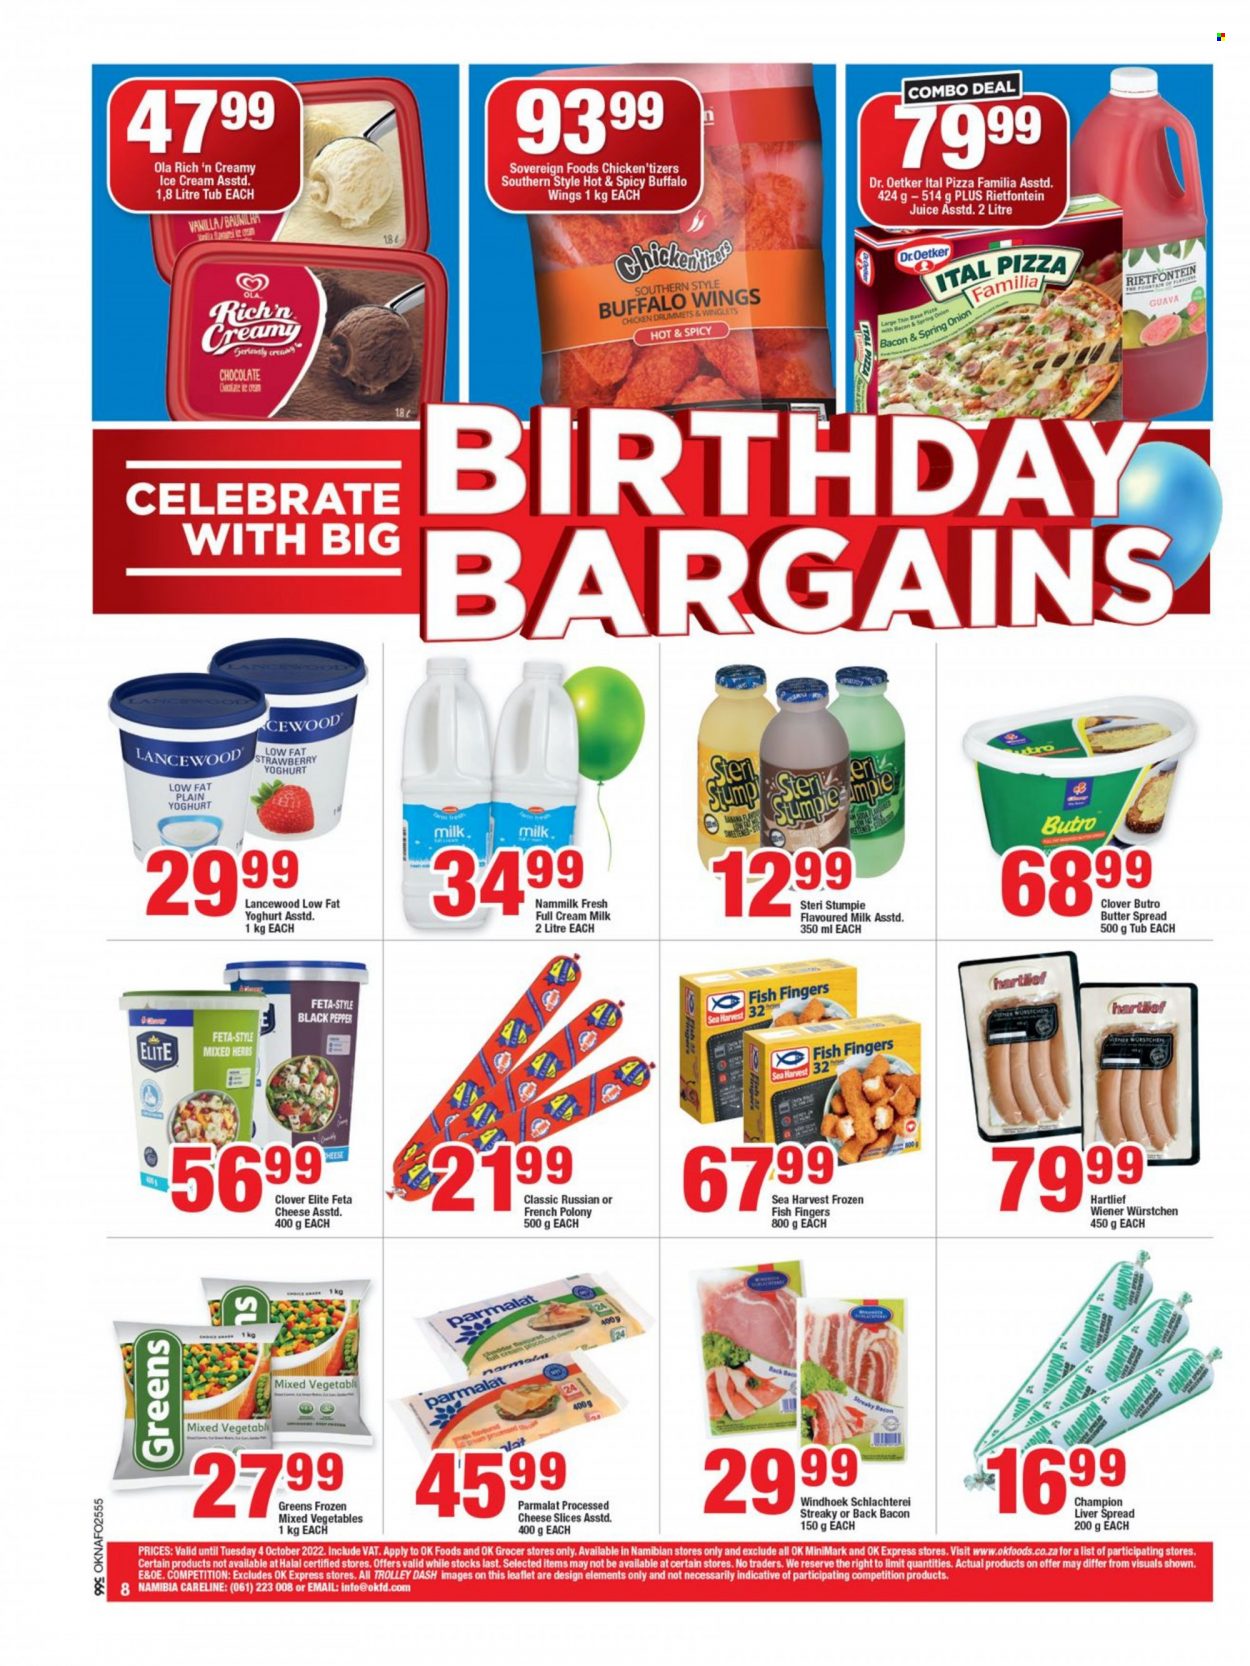 OK catalogue  - 29/09/2022 - 04/10/2022 - Sales products - Bella, onion, green onion, guava, fish, fish fingers, Sea Harvest, fish sticks, pizza, french polony, streaky bacon, polony, sliced cheese, cheddar, Dr. Oetker, Lancewood, feta cheese, yoghurt, Clover, Parmalat, flavoured milk, Steri Stumpie, butter, ice cream, Ola, mixed vegetables, Ital Pizza, black pepper, juice, Sol. Page 7.